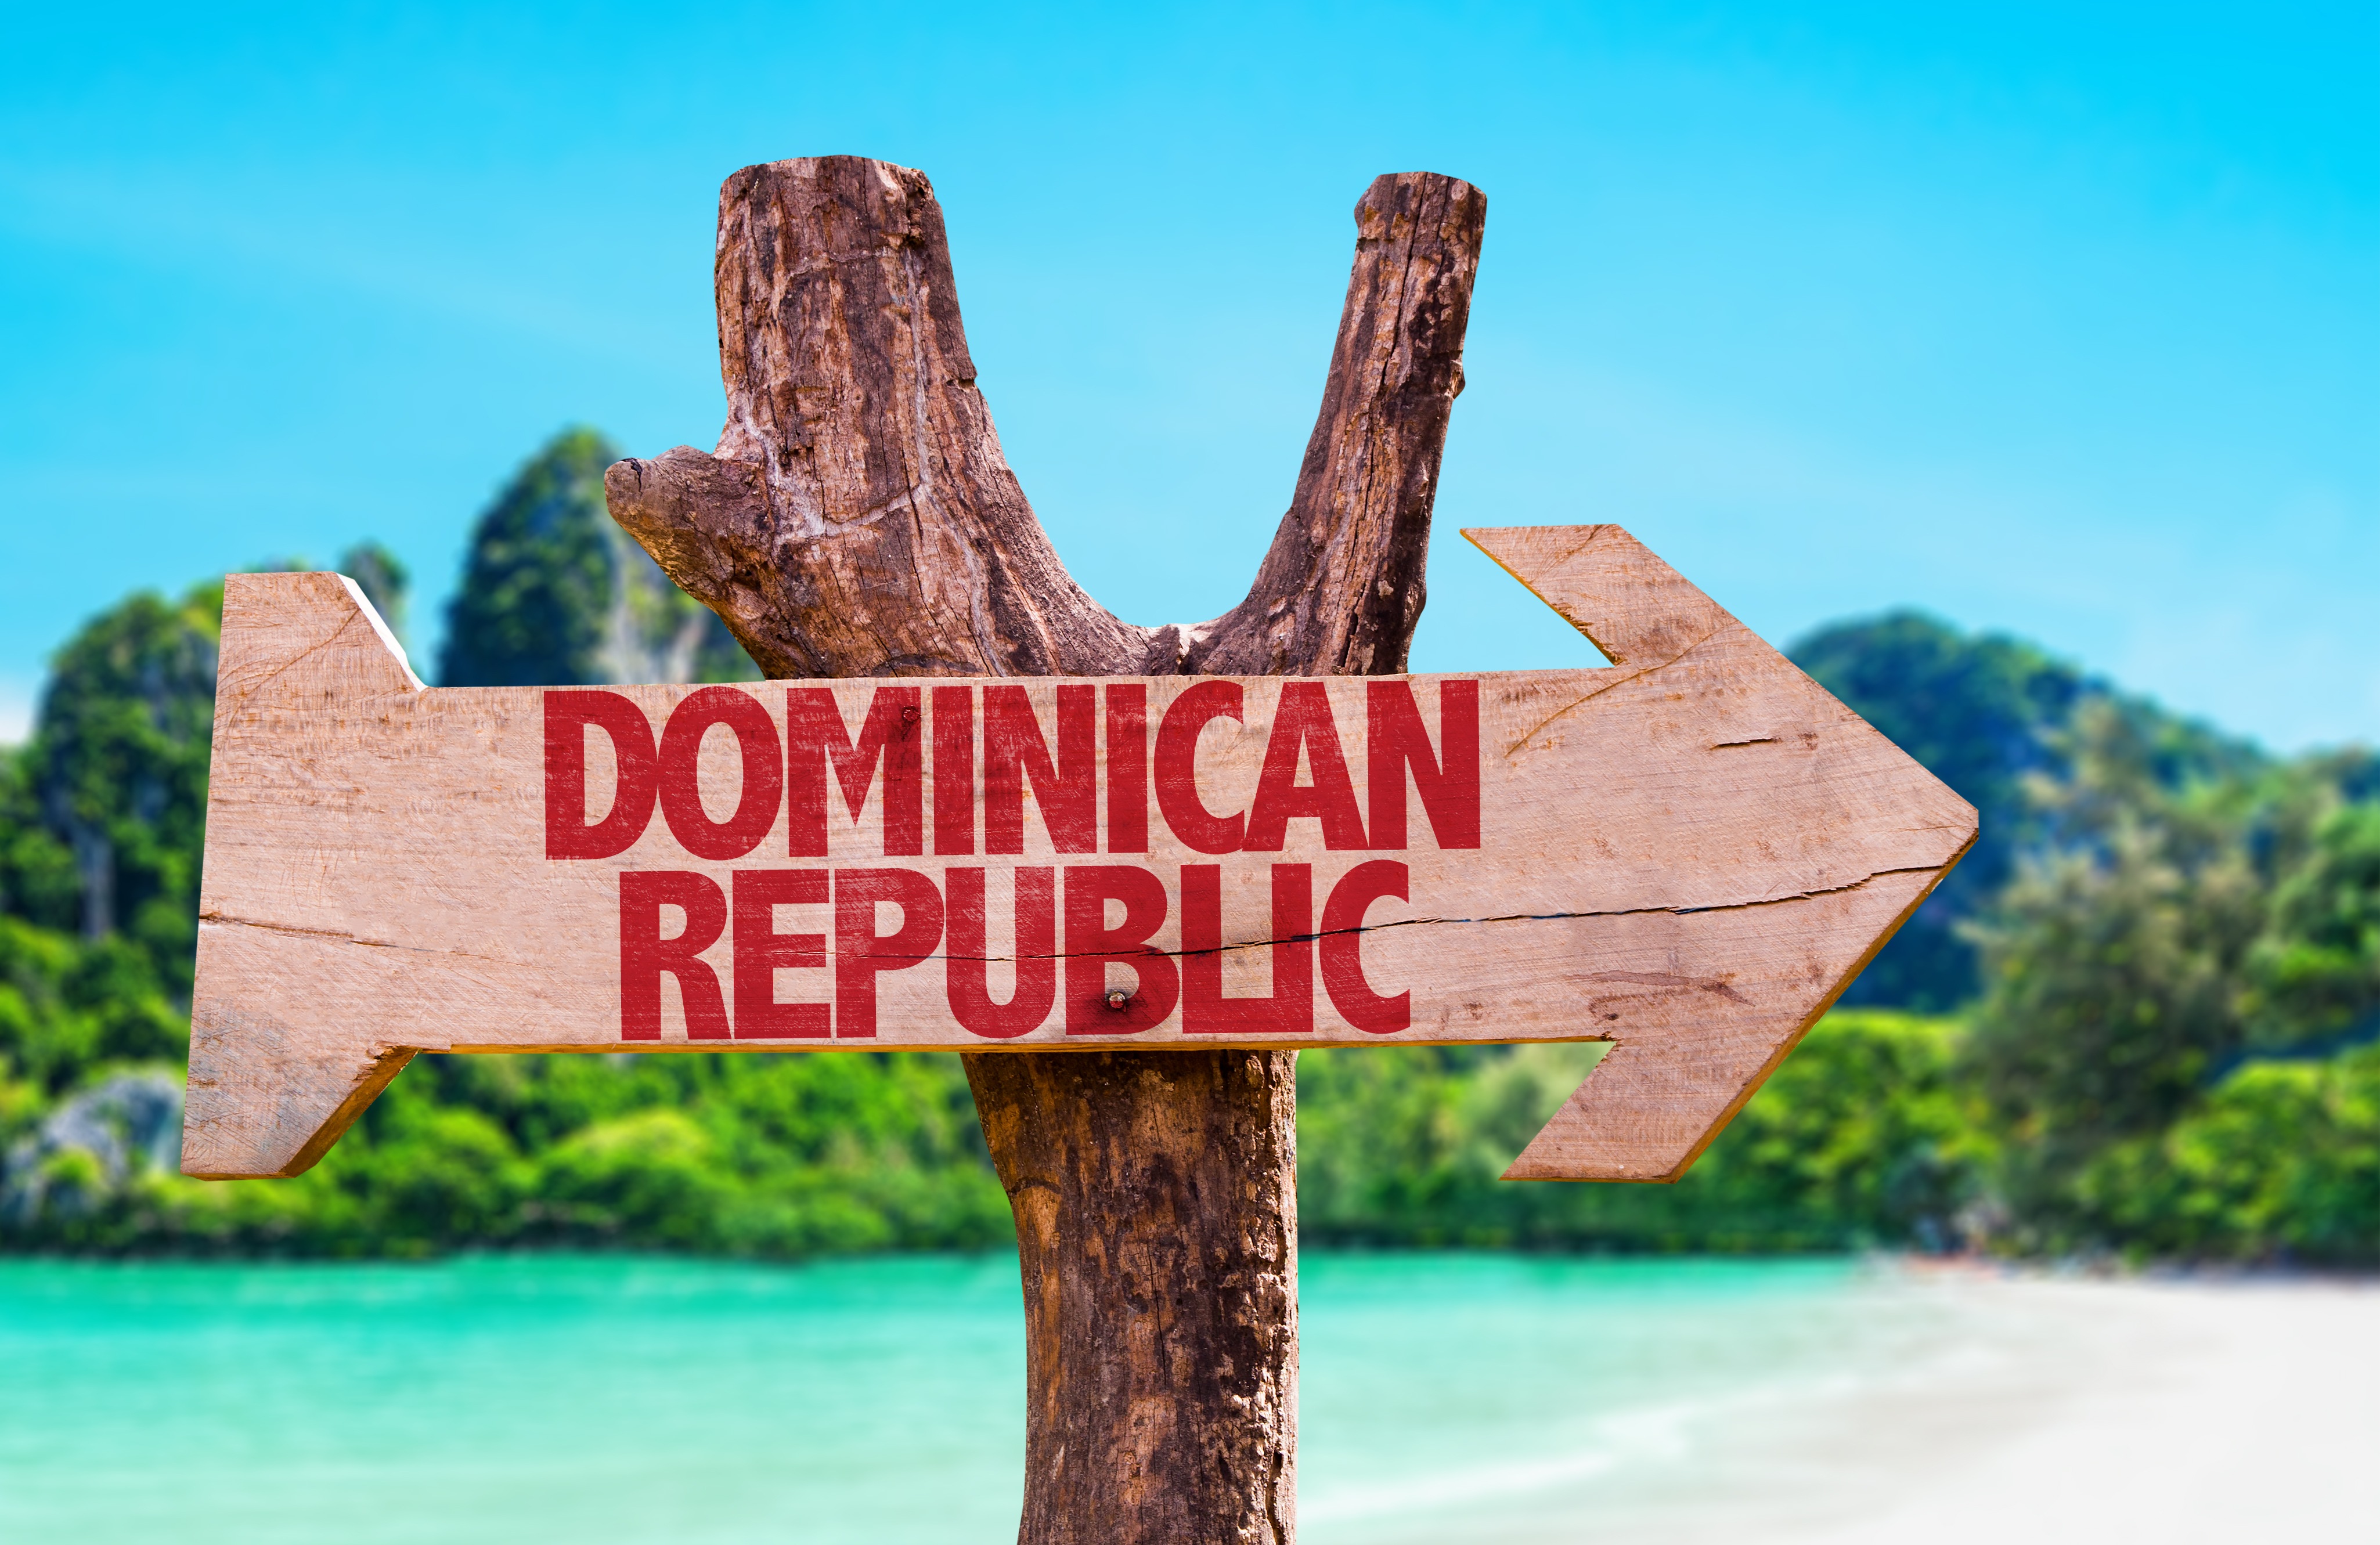 Visiting the Dominican Republic